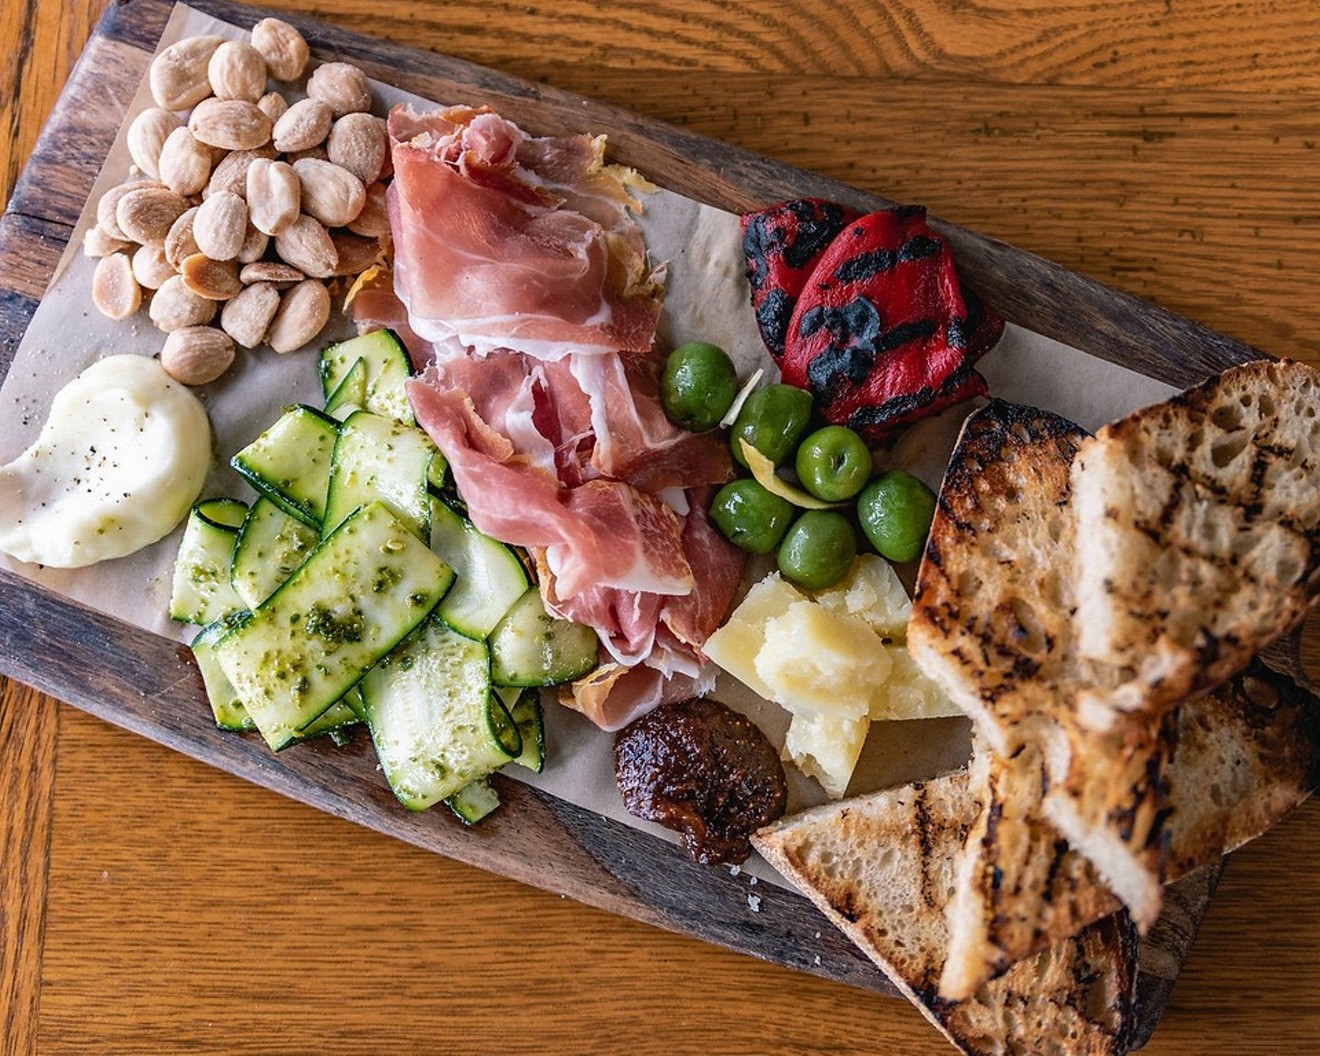 https://media2.phoenixnewtimes.com/phx/imager/10-great-meat-and-cheese-boards-in-metro-phoenix/u/magnum/11442941/north_italia-chef_s_board.jpg?cb=1642609419